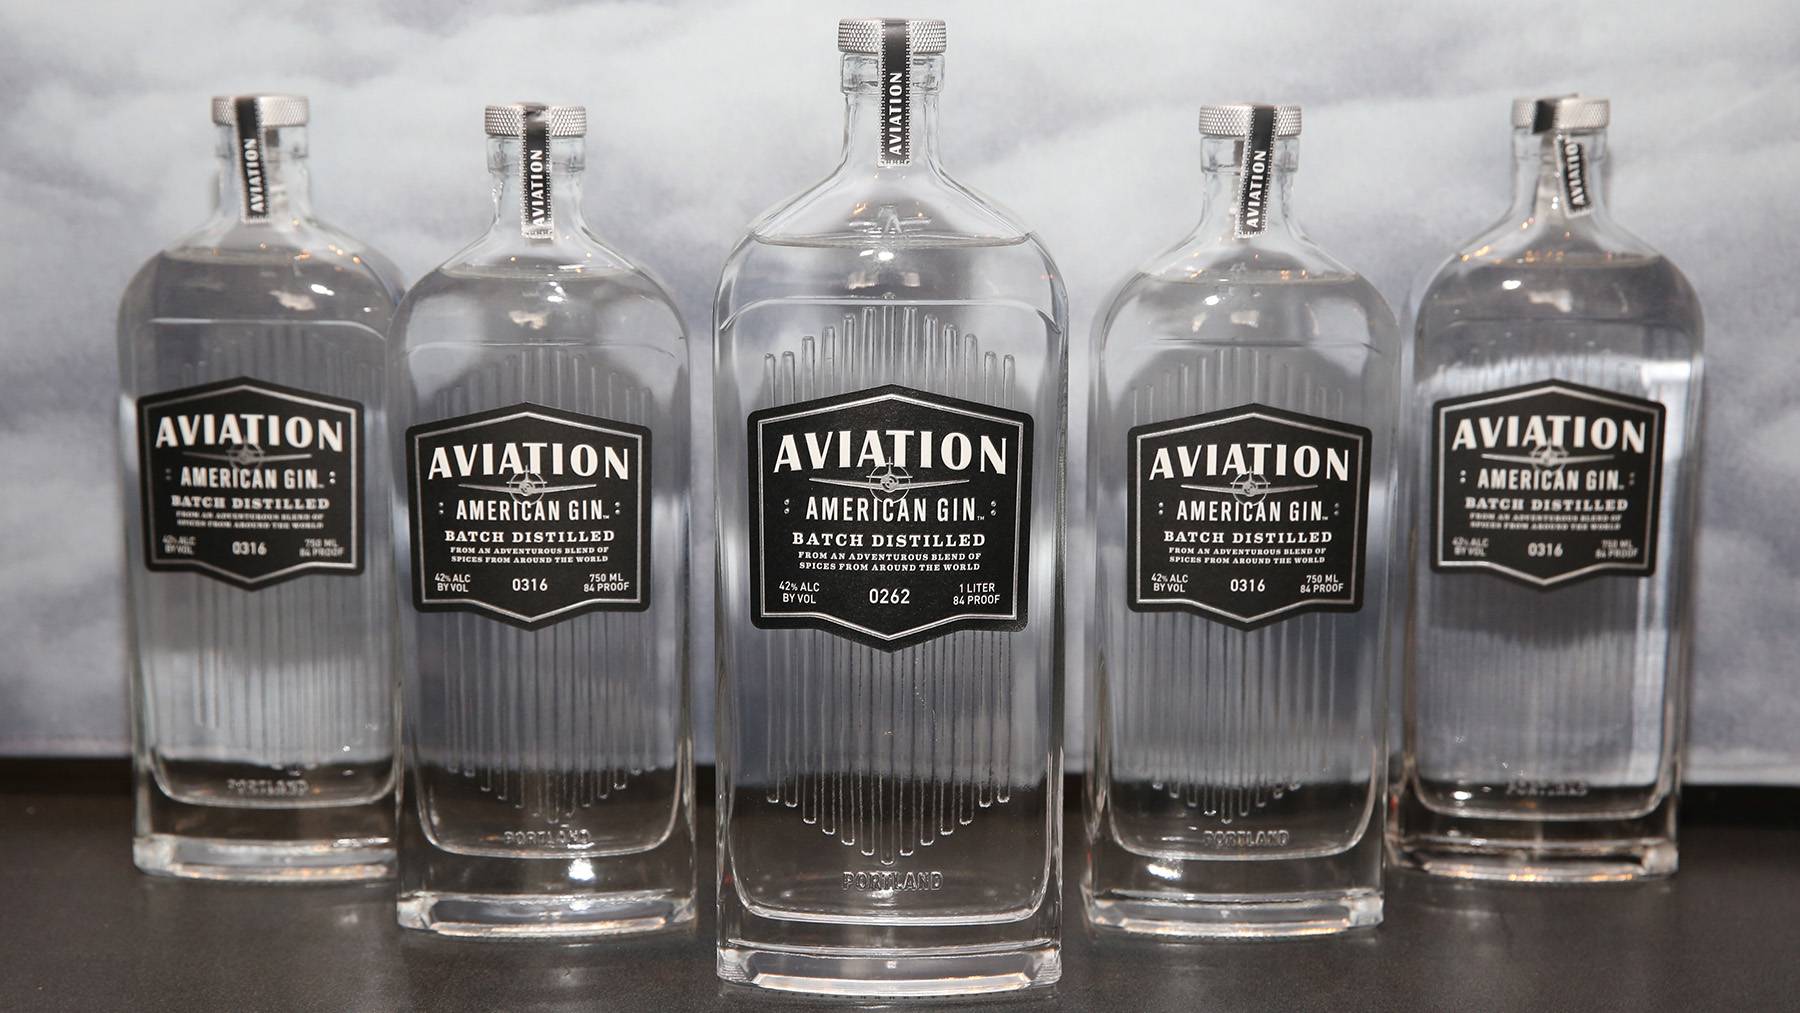 A view of Aviation American Gin.